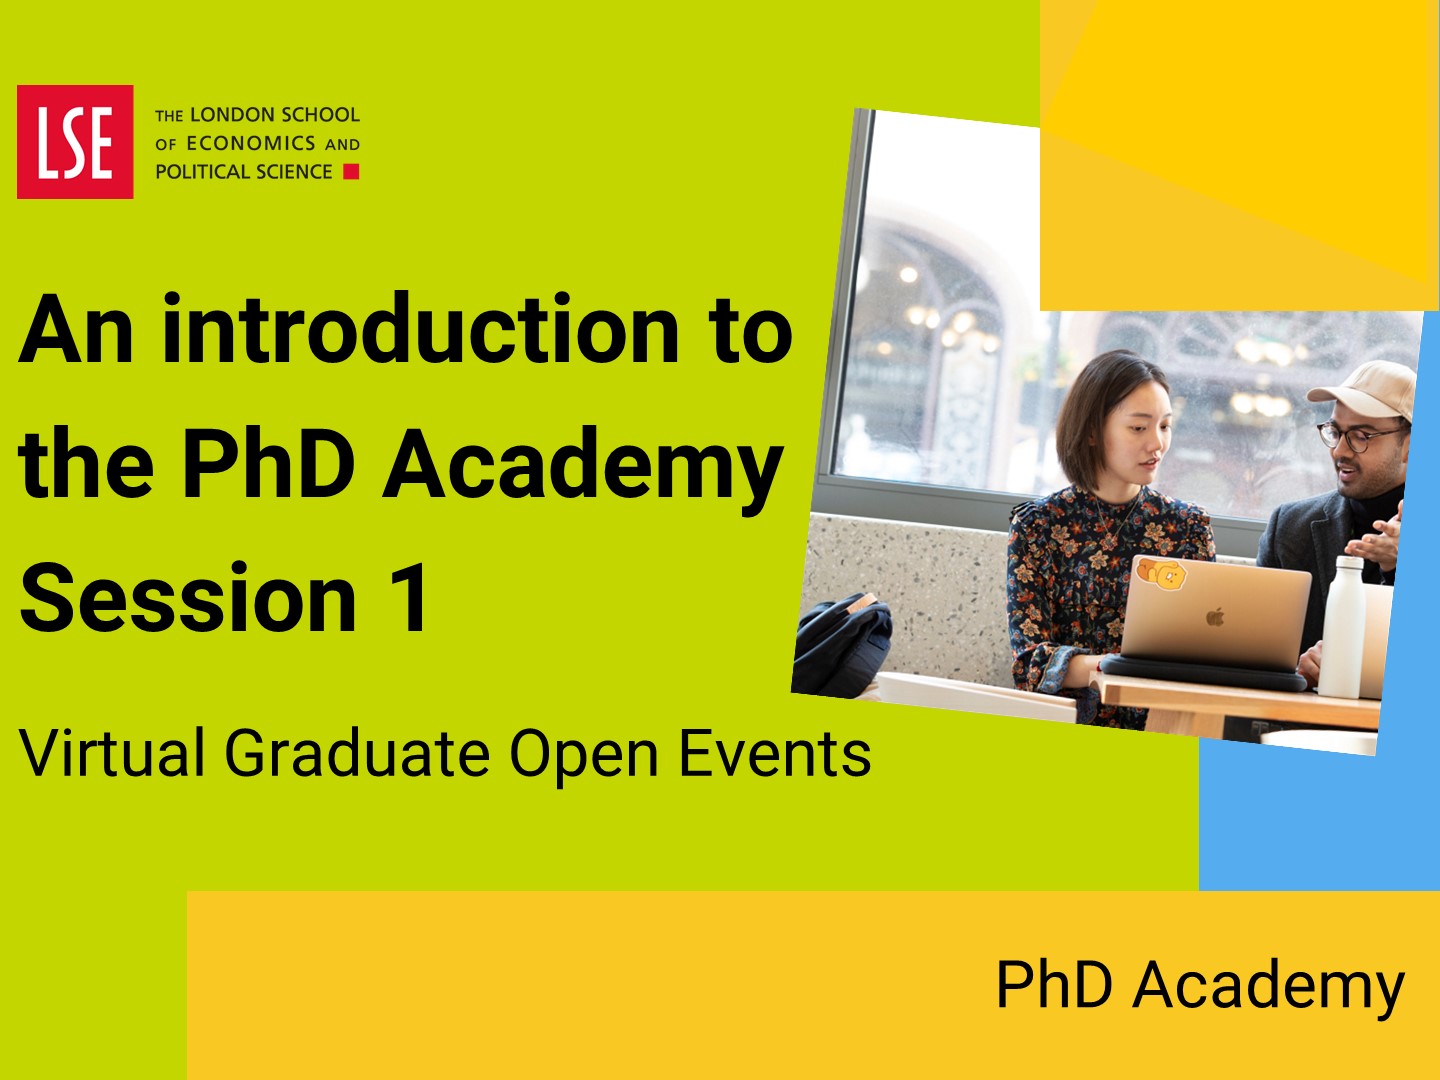 An introduction to the PhD Academy (session 1)